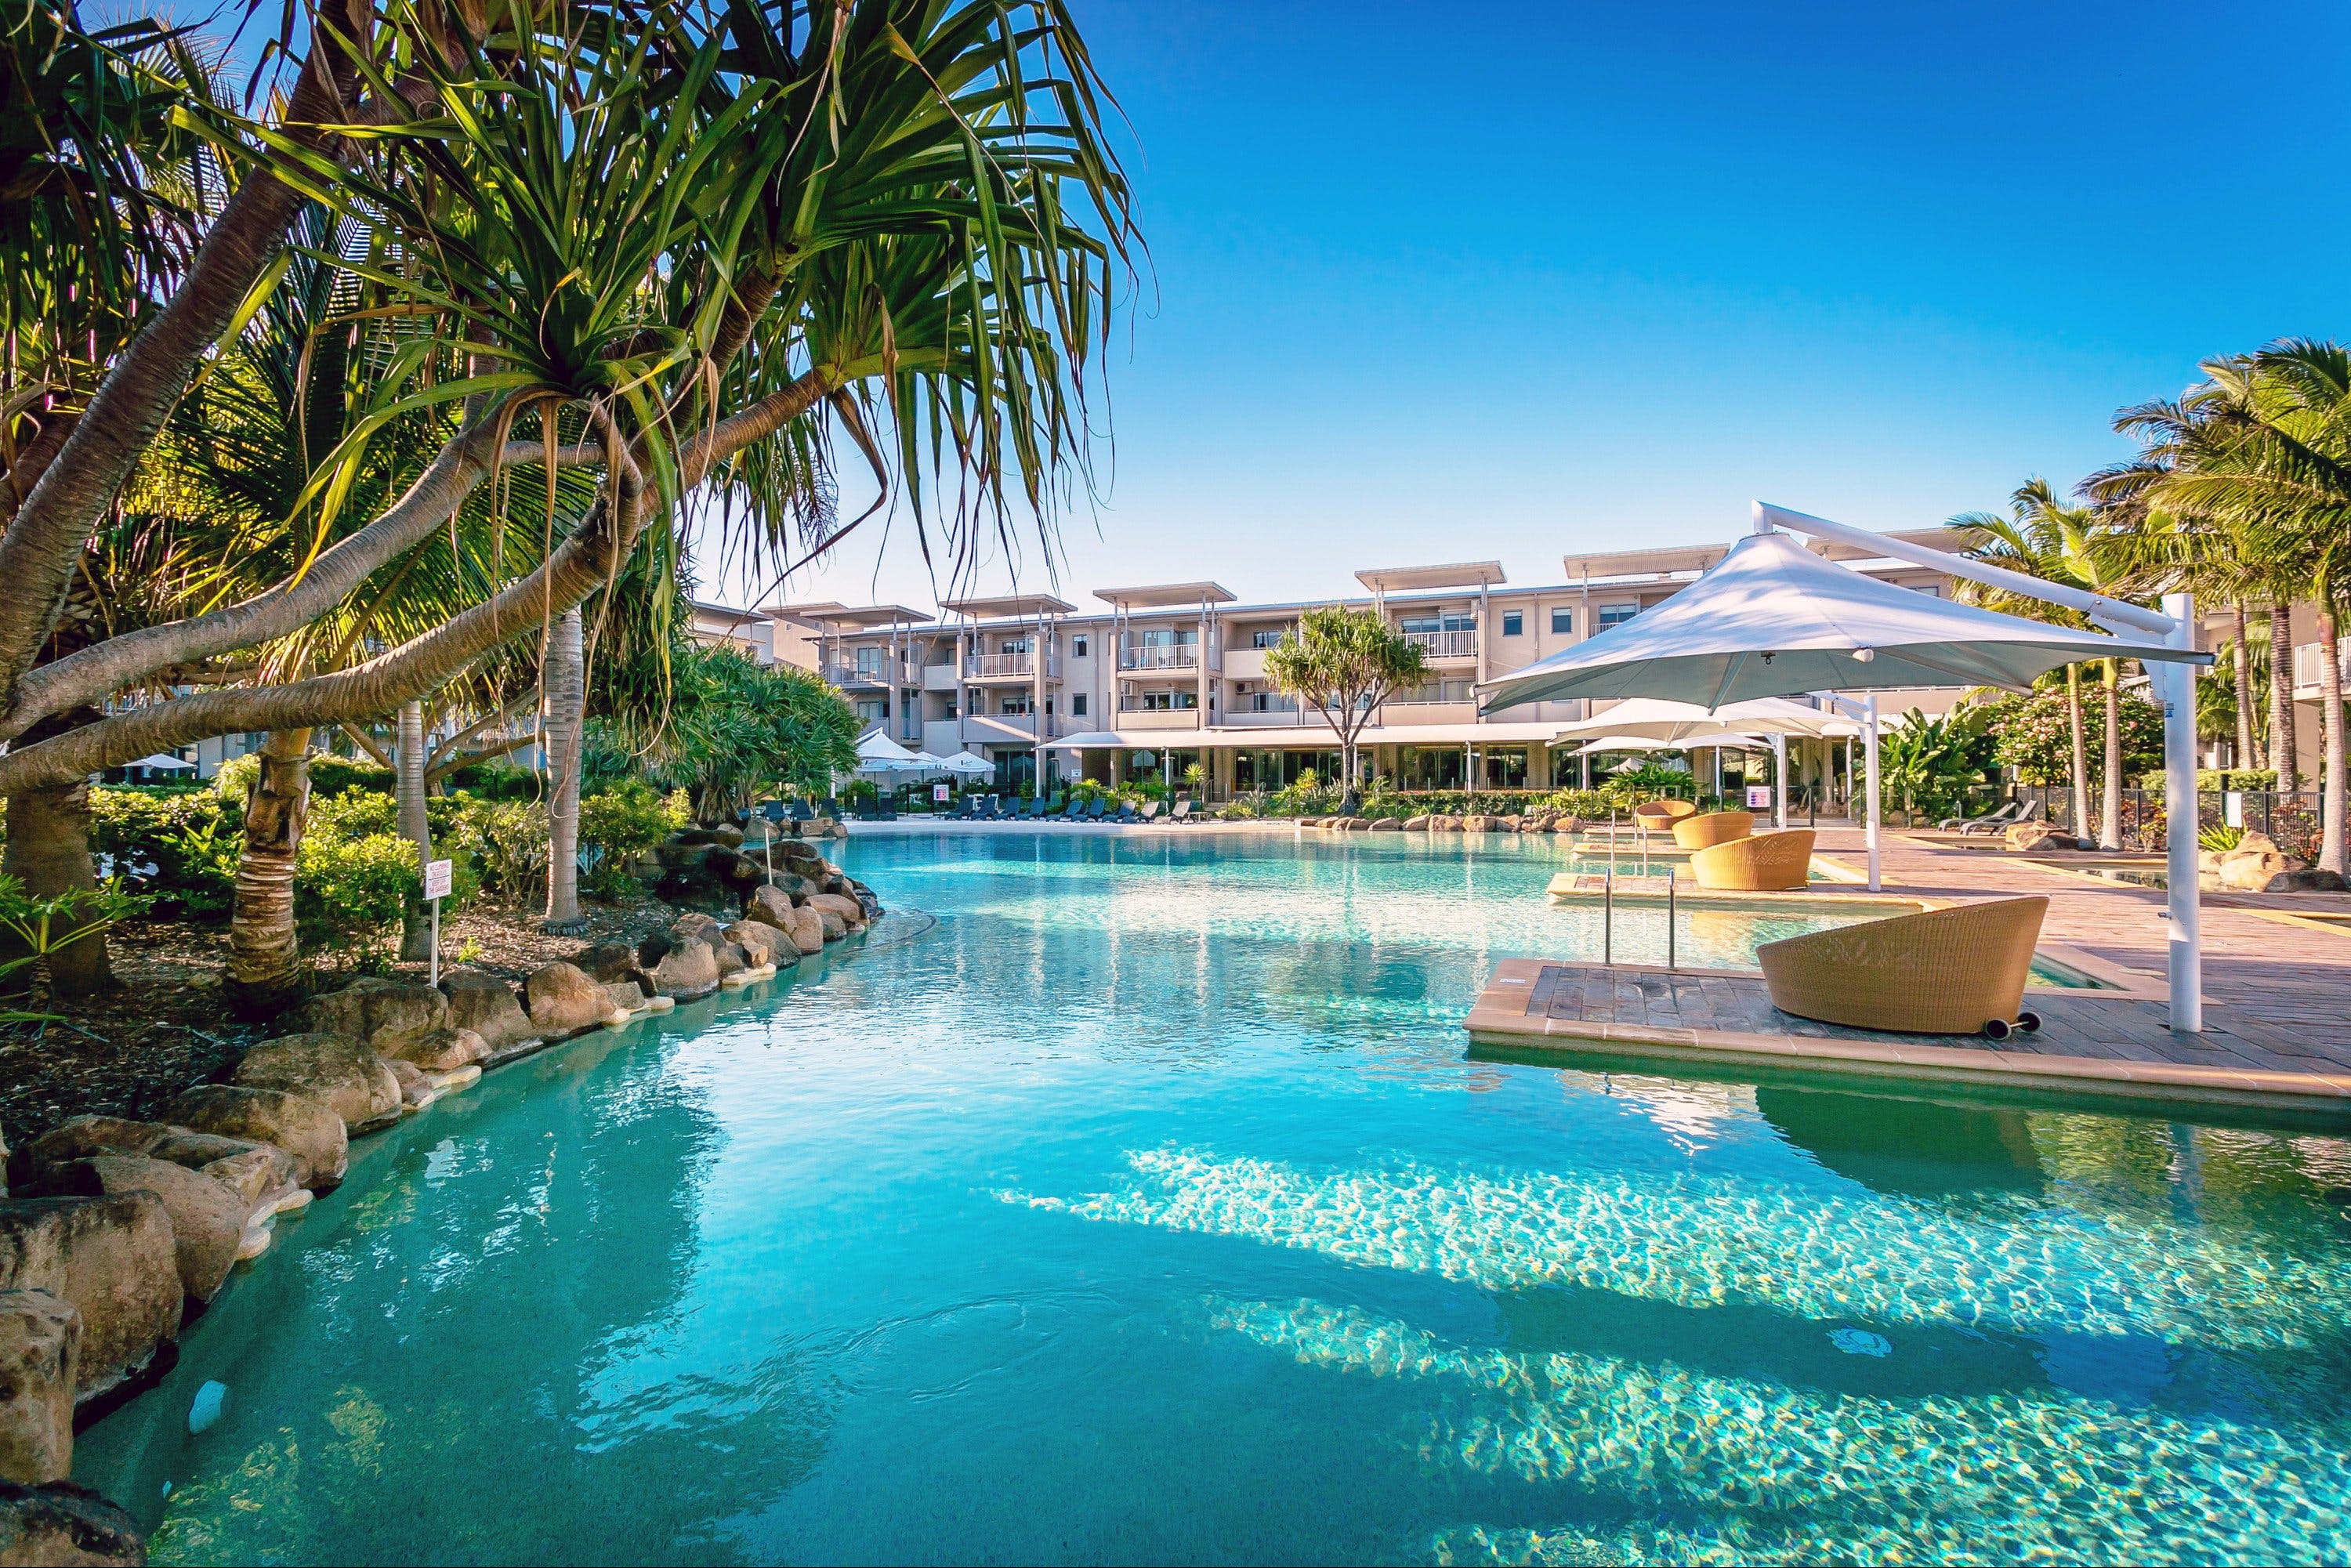 Peppers Salt Resort and Spa - Lismore Accommodation